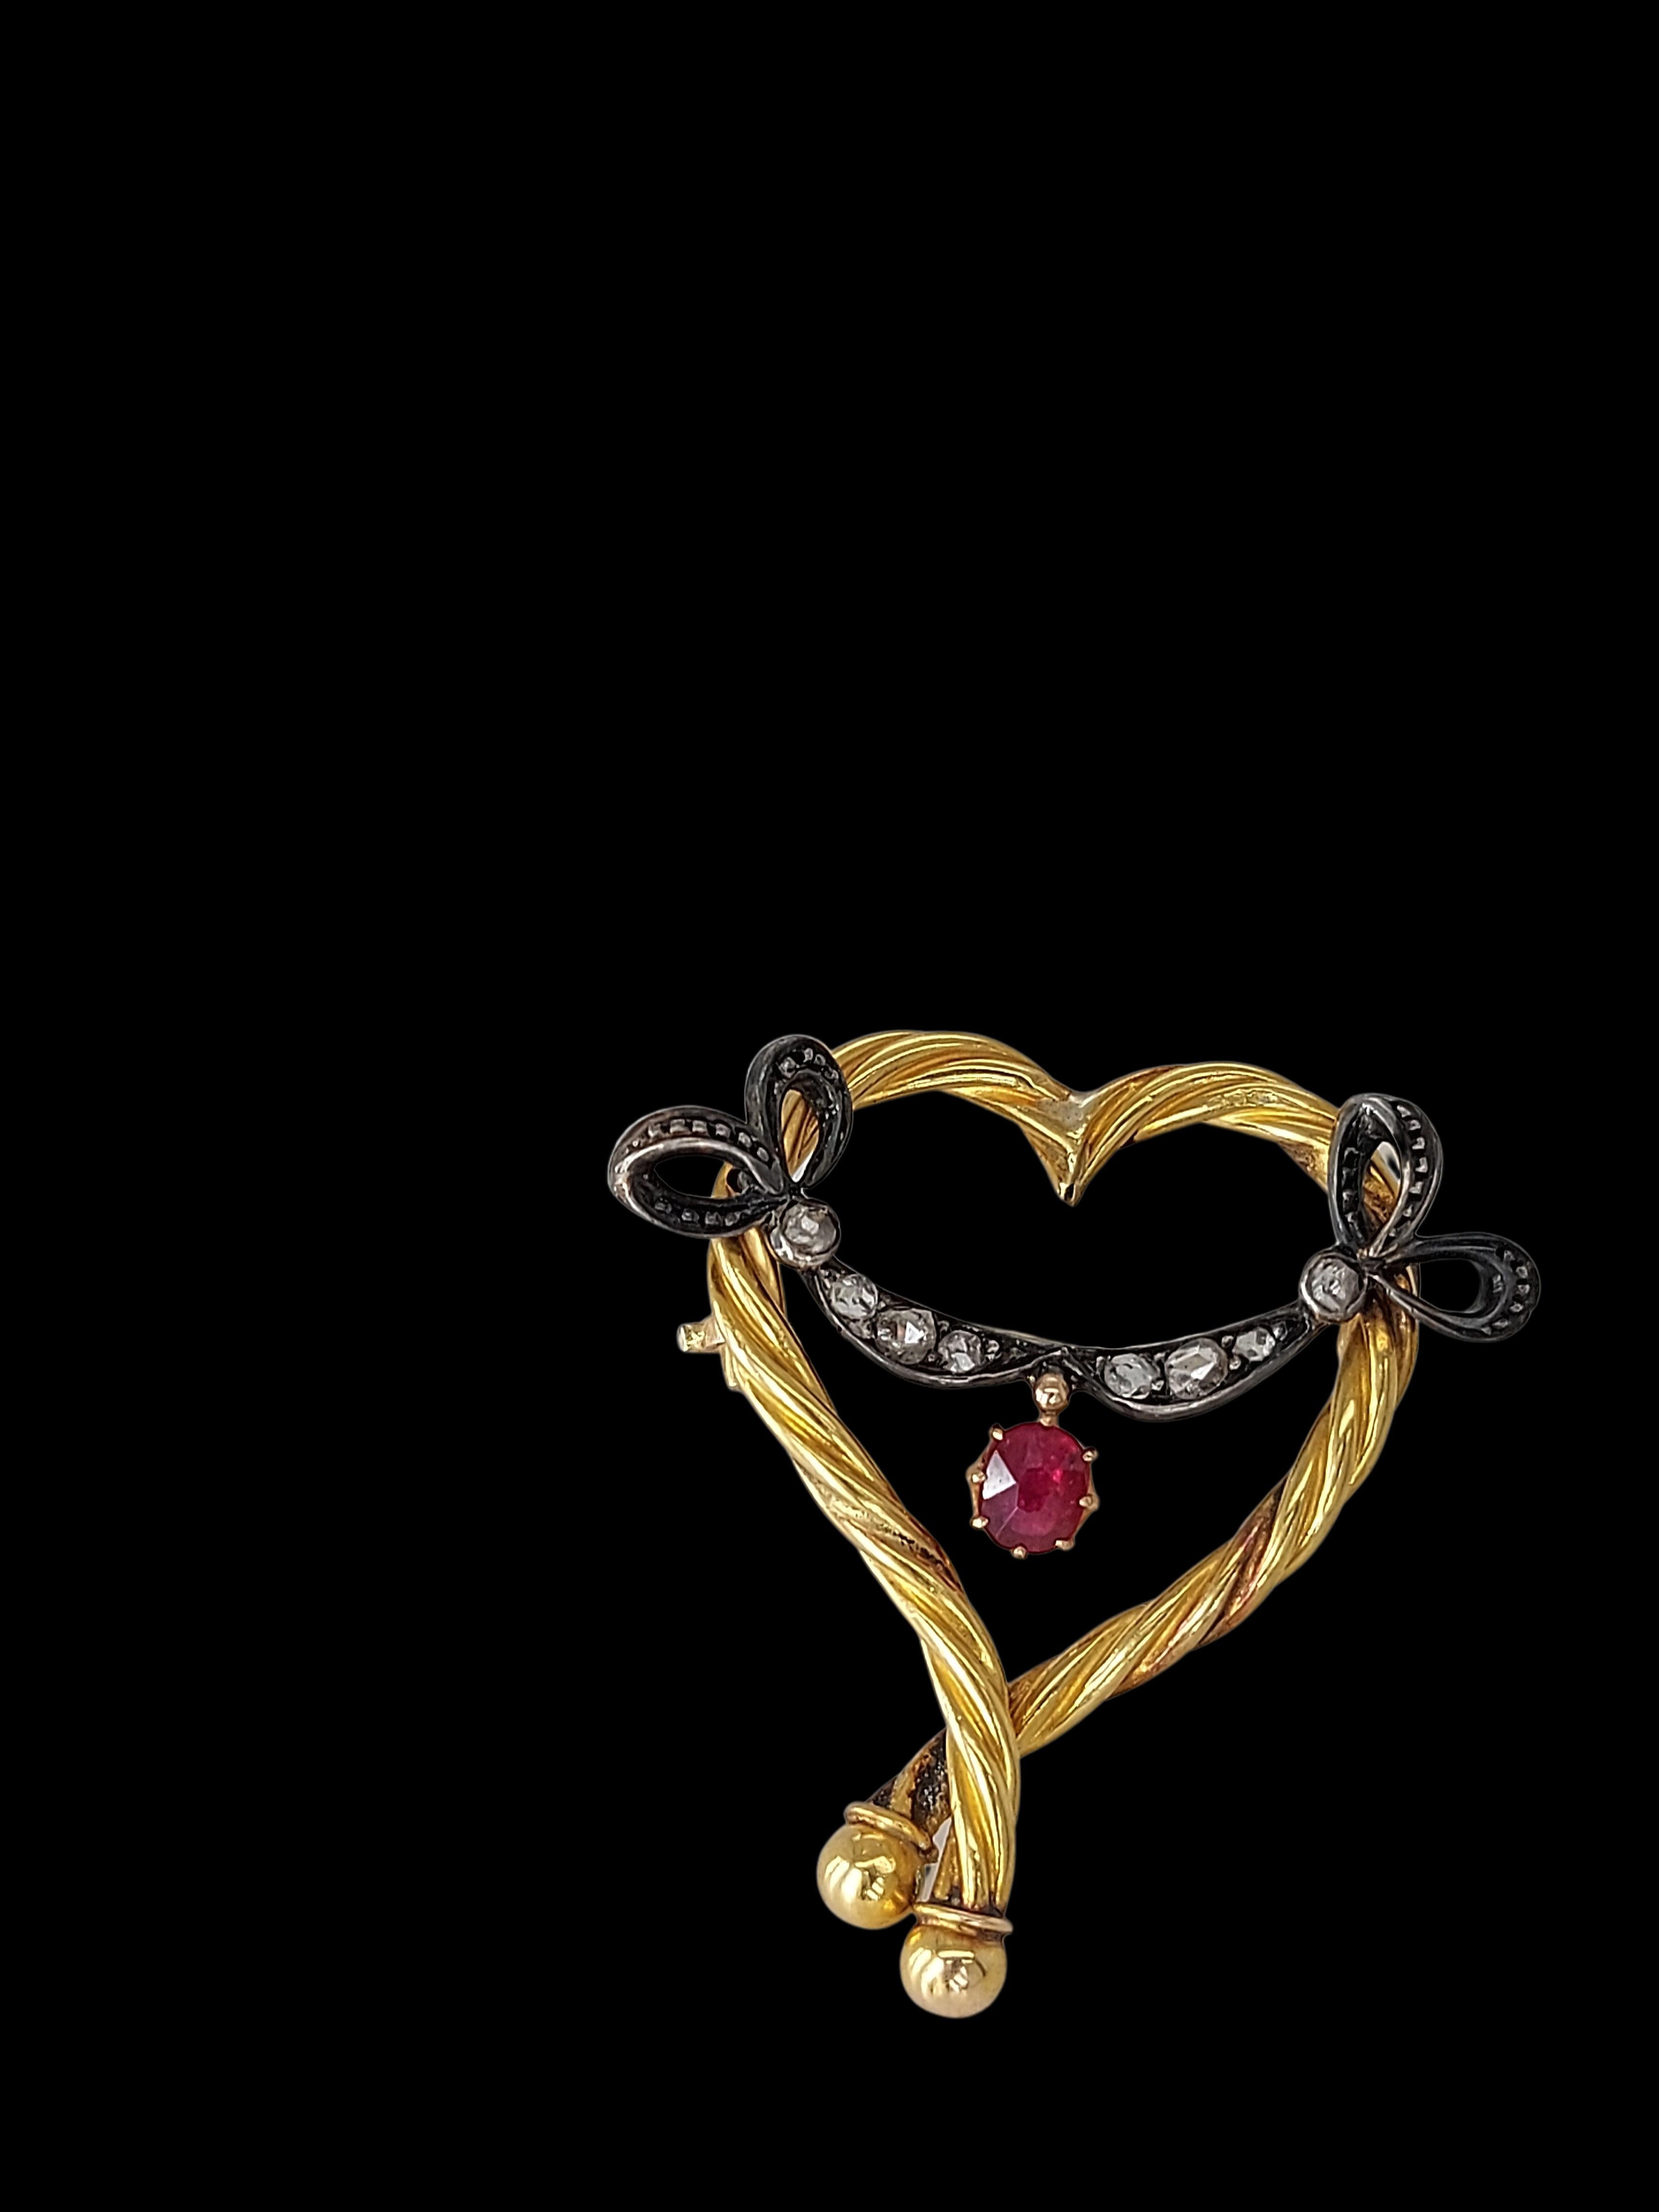 18kt Gold Heart Shape Brooch with Natural Ruby & Old Cut Diamonds 3